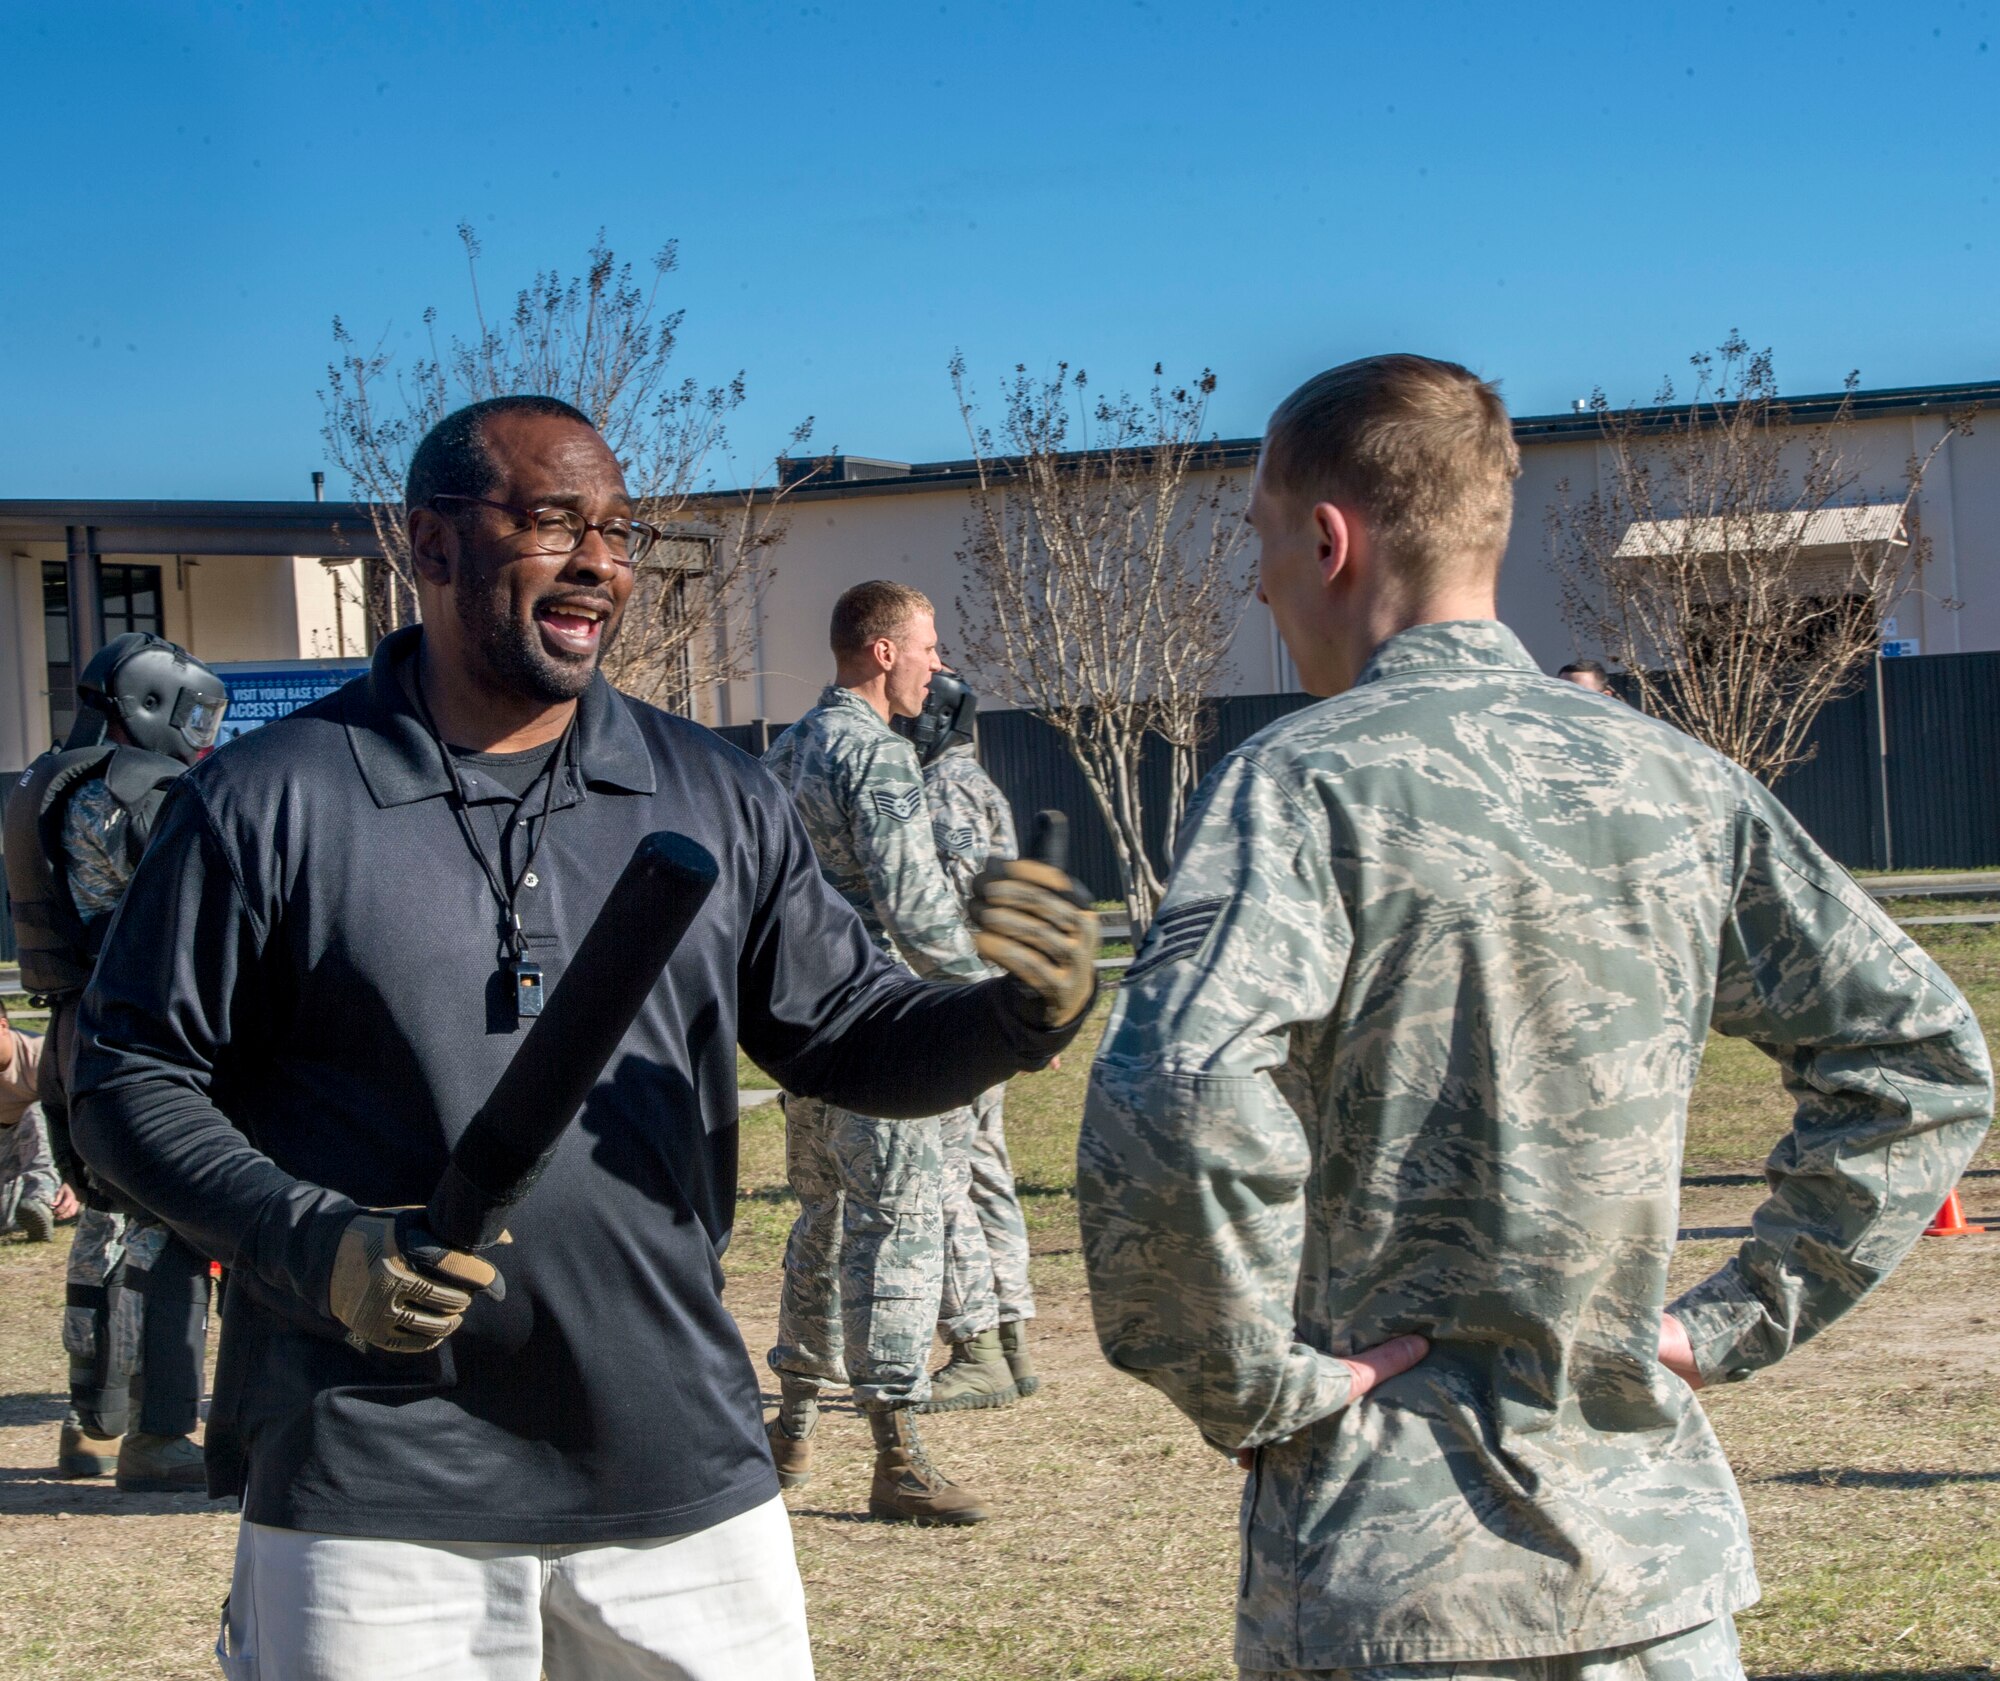 Keith Parker, Department of Air Force manager with the 1st Special Operations Security Forces Squadron, critiques an Airman during training at Hurlburt Field, Fla., Feb. 10, 2016. Security Forces personnel participate in combat scenario exercises to gain real-world experience. (U.S. Air Force photo by Senior Airman Krystal M. Garrett)